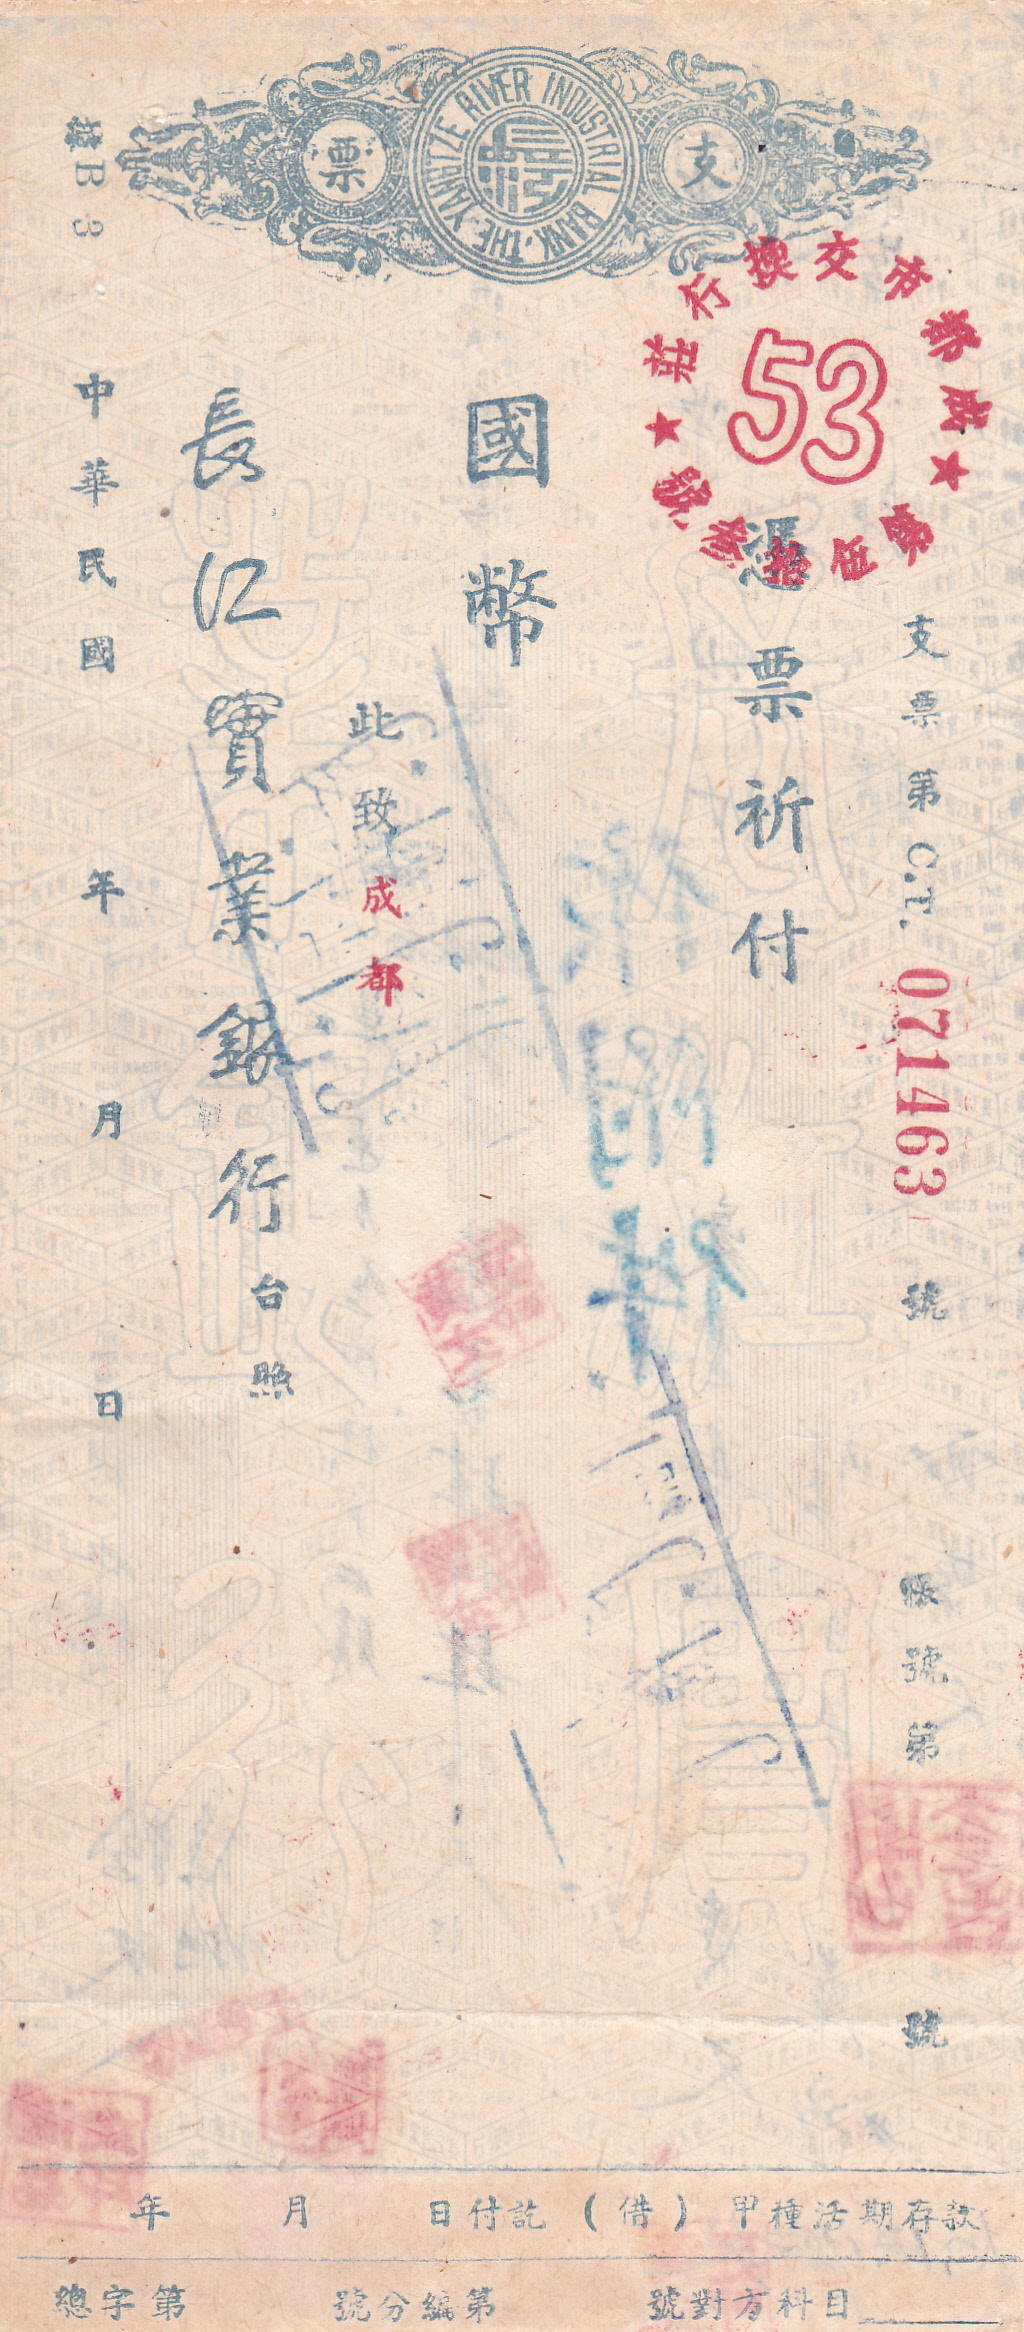 D2234, Check of Yangtze Industrial Bank, China 1940's